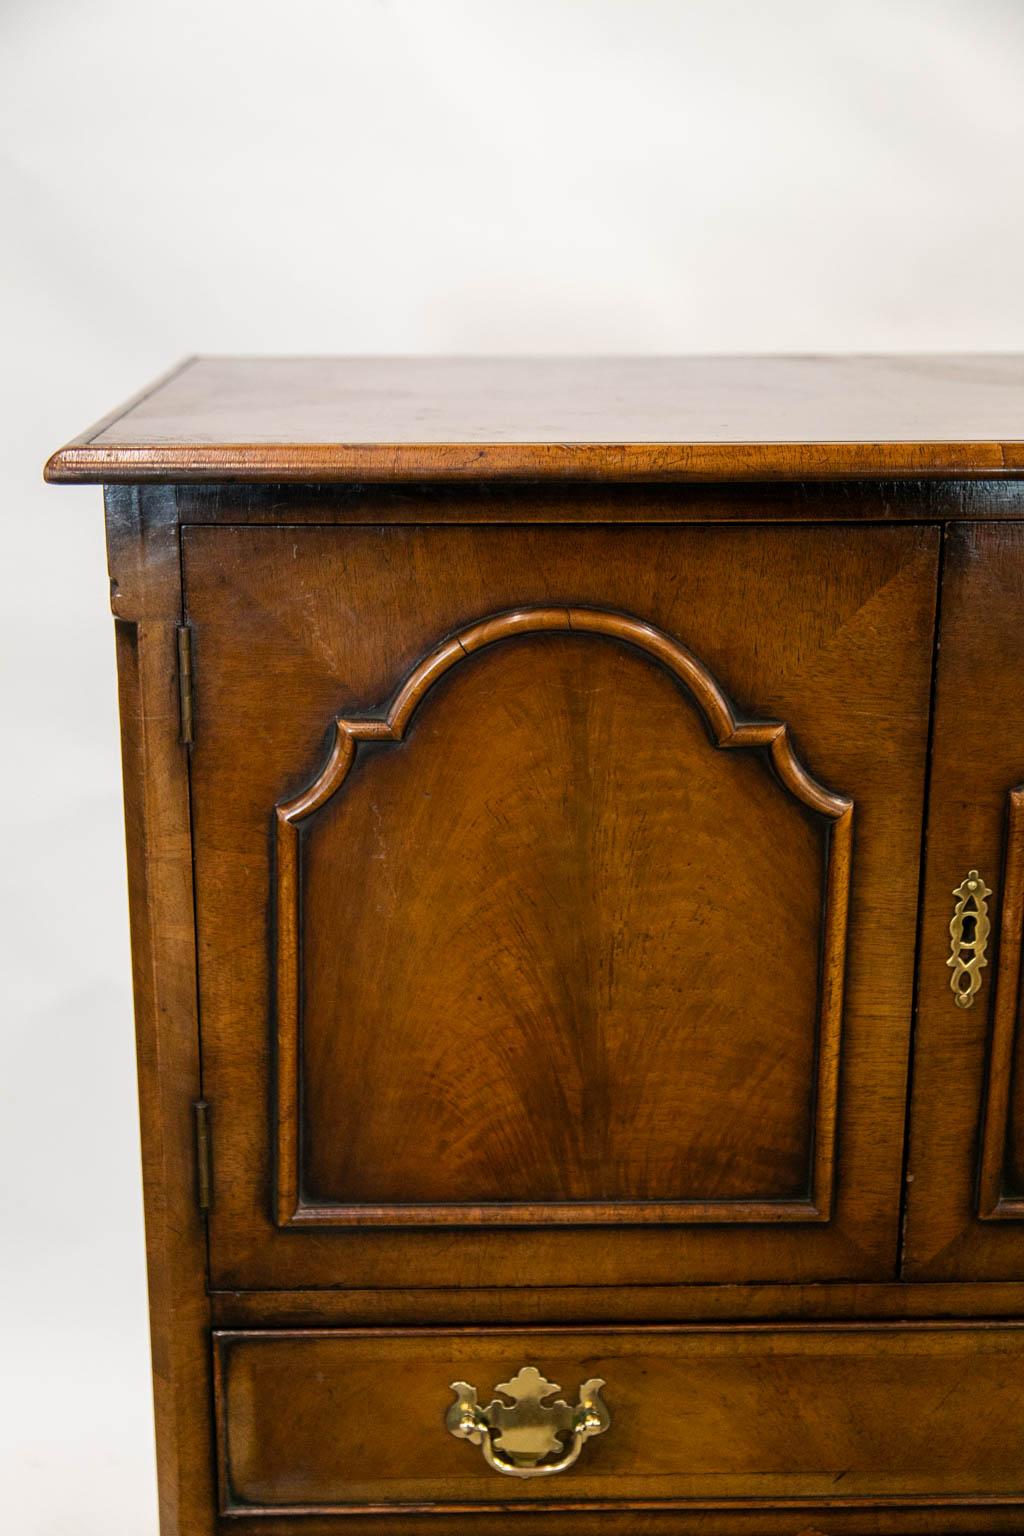 The top of this English walnut cabinet is cross banded with walnut and has burled bookmatched veneer. The base has legs carved with acanthus leaves that terminate in drake feet. The hardware is original.